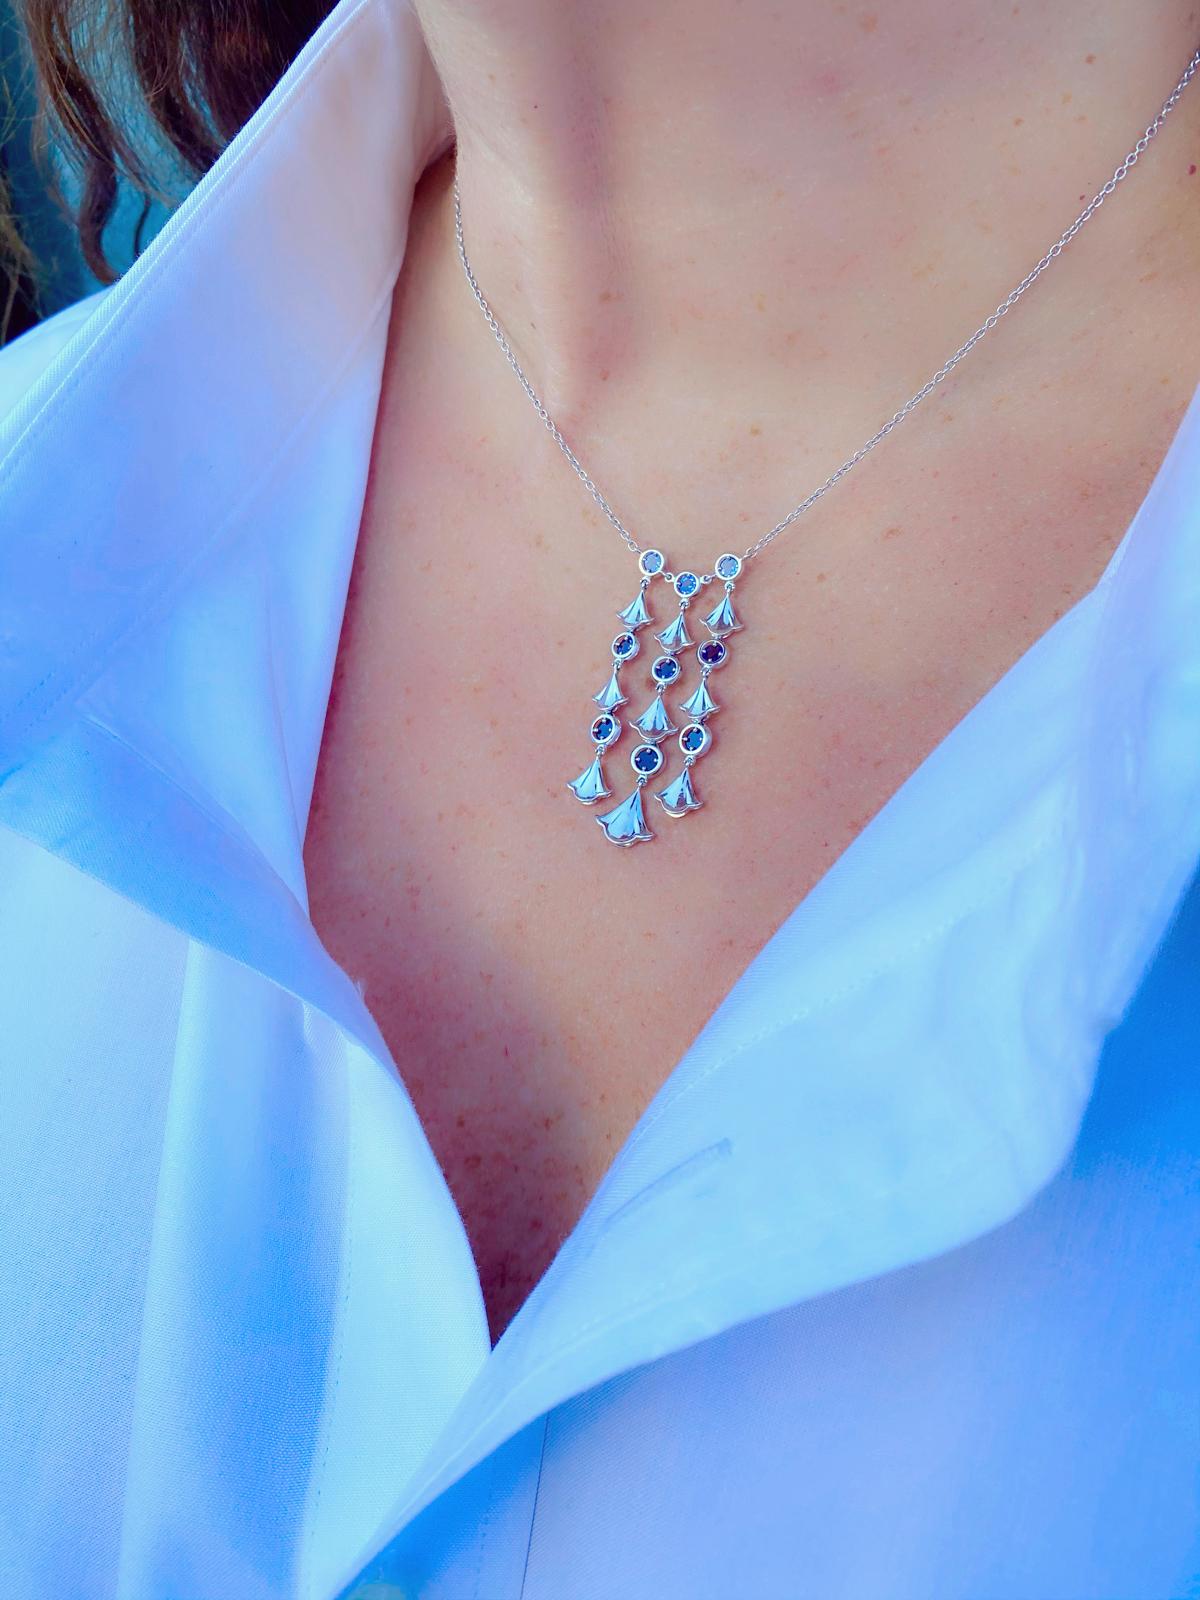 This elegant drop necklace will accent any outfit! By Marina B. of the famed Bulgari family, the 18k white gold pendant-necklace is designed with ginko leaf links alternating with rose-cut sapphire links, with a total sapphire weight of 1.62 carats.